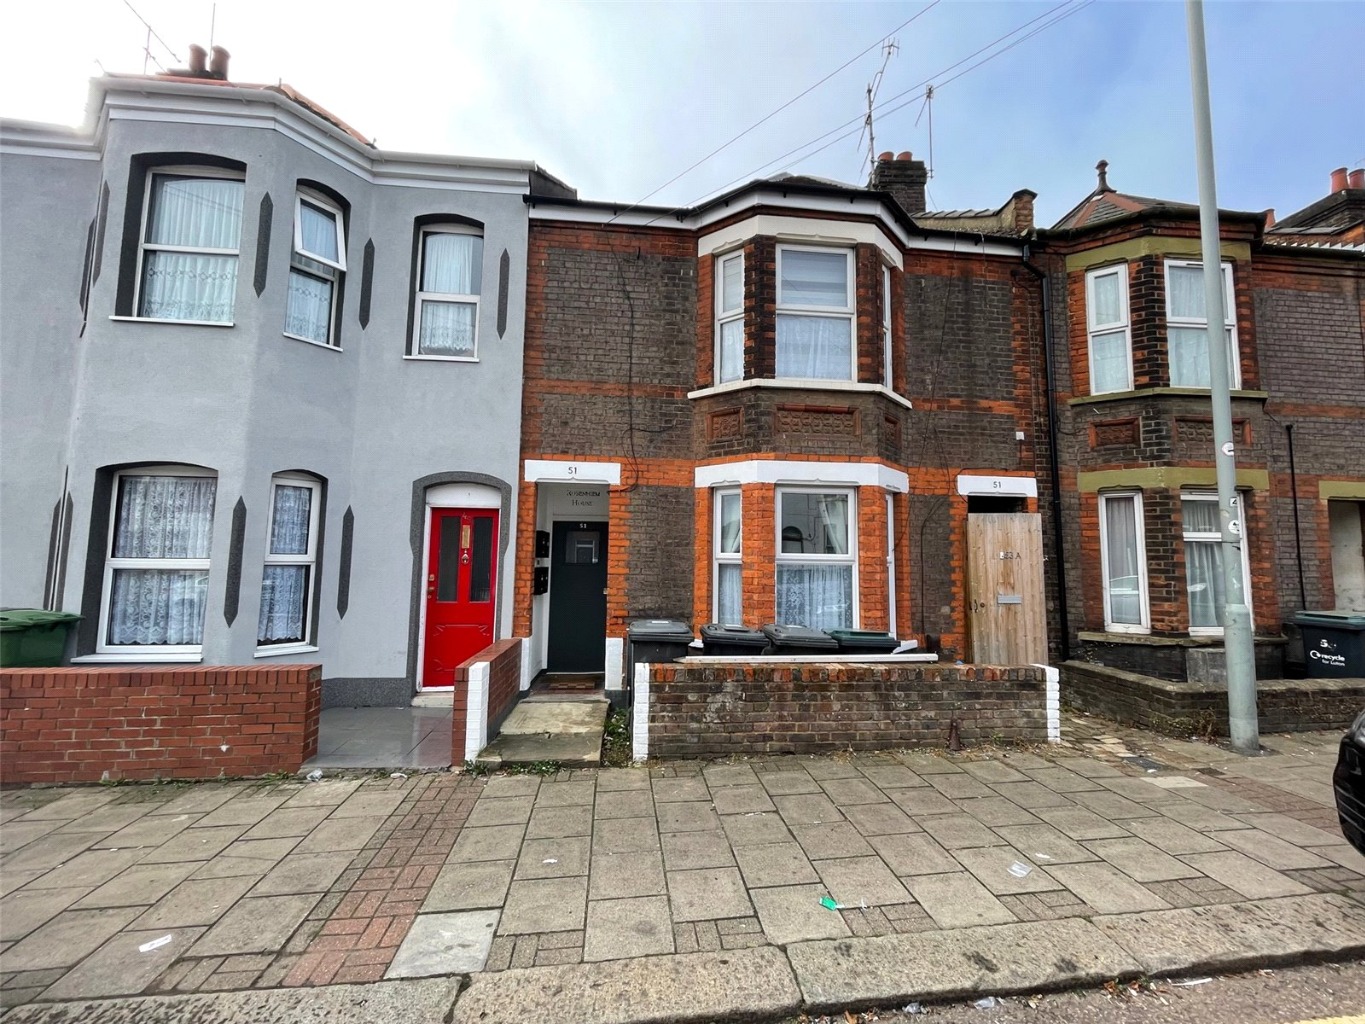 4 bed terraced house for sale in Luton, LU1 1HX 0